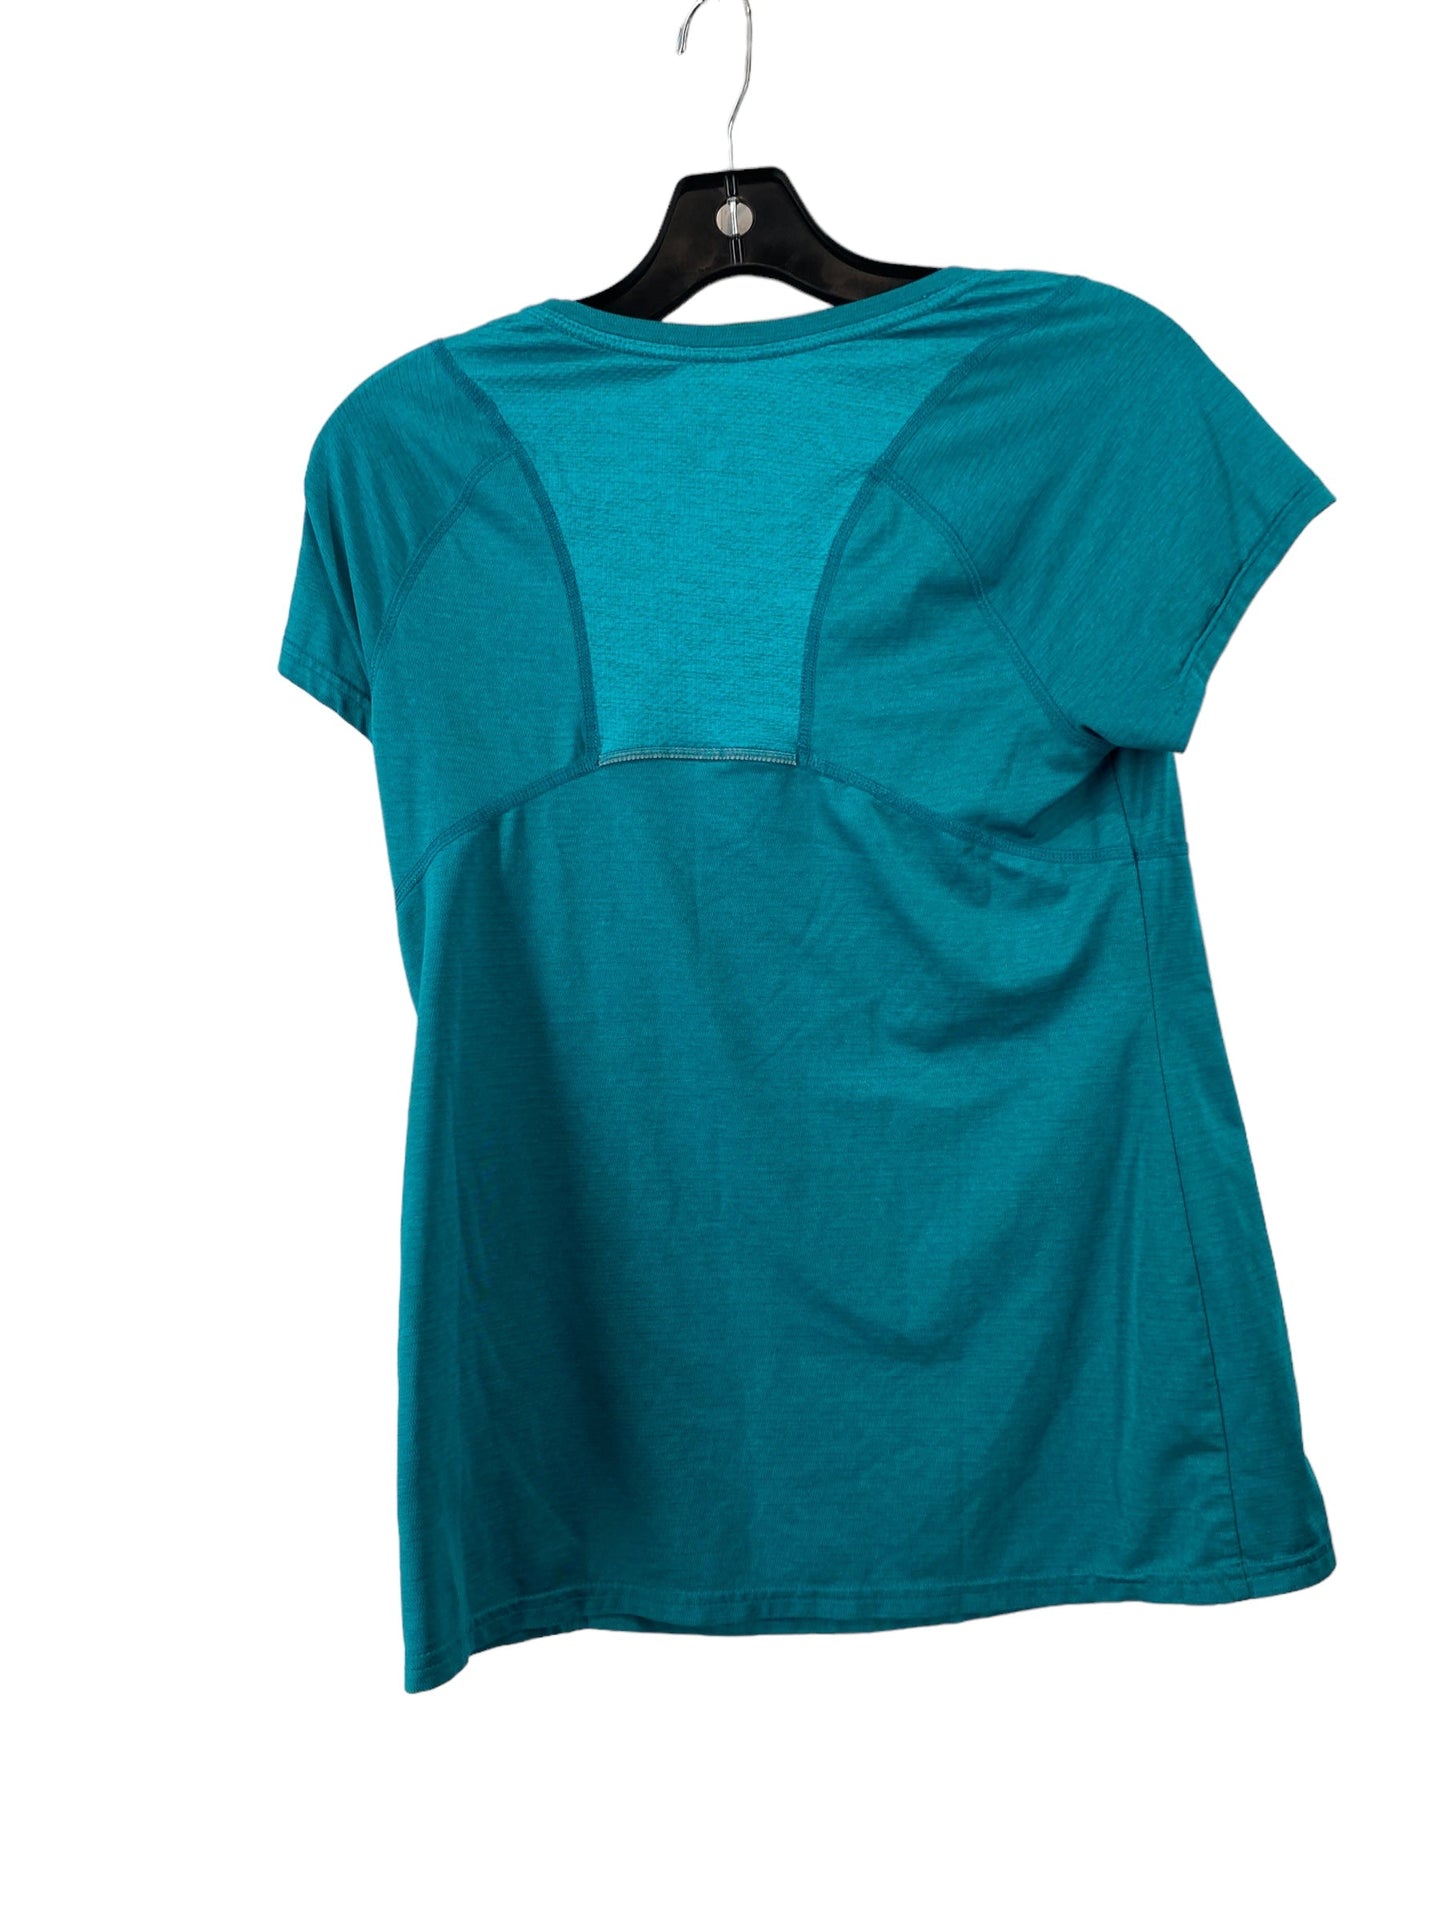 Teal Athletic Top Short Sleeve Old Navy, Size S